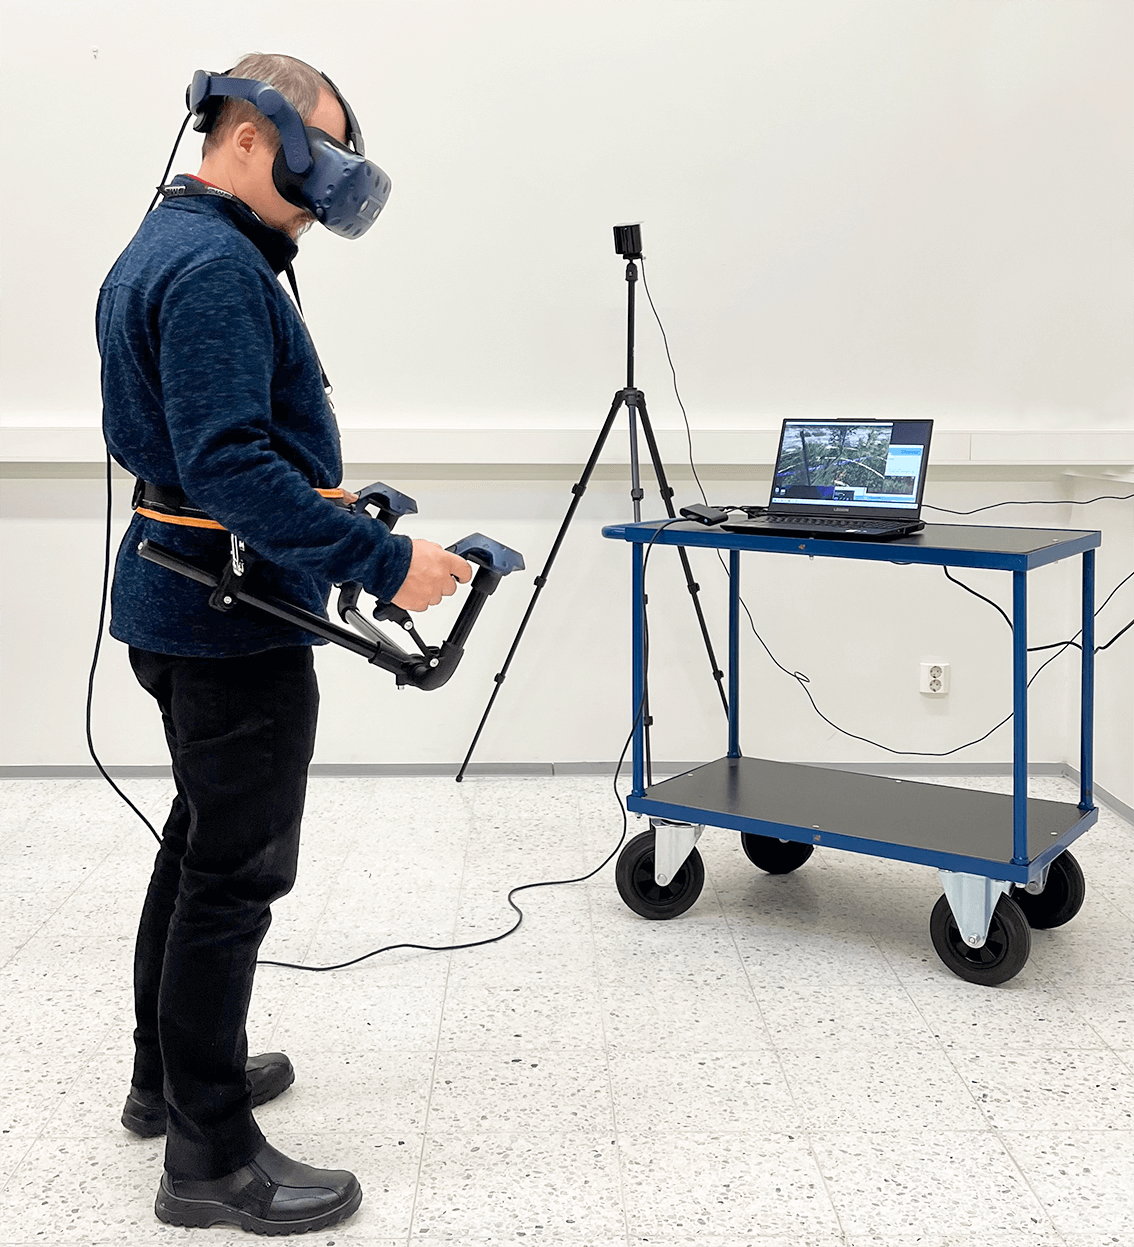 Picture of a person operating the VR based brushcutter simulator.